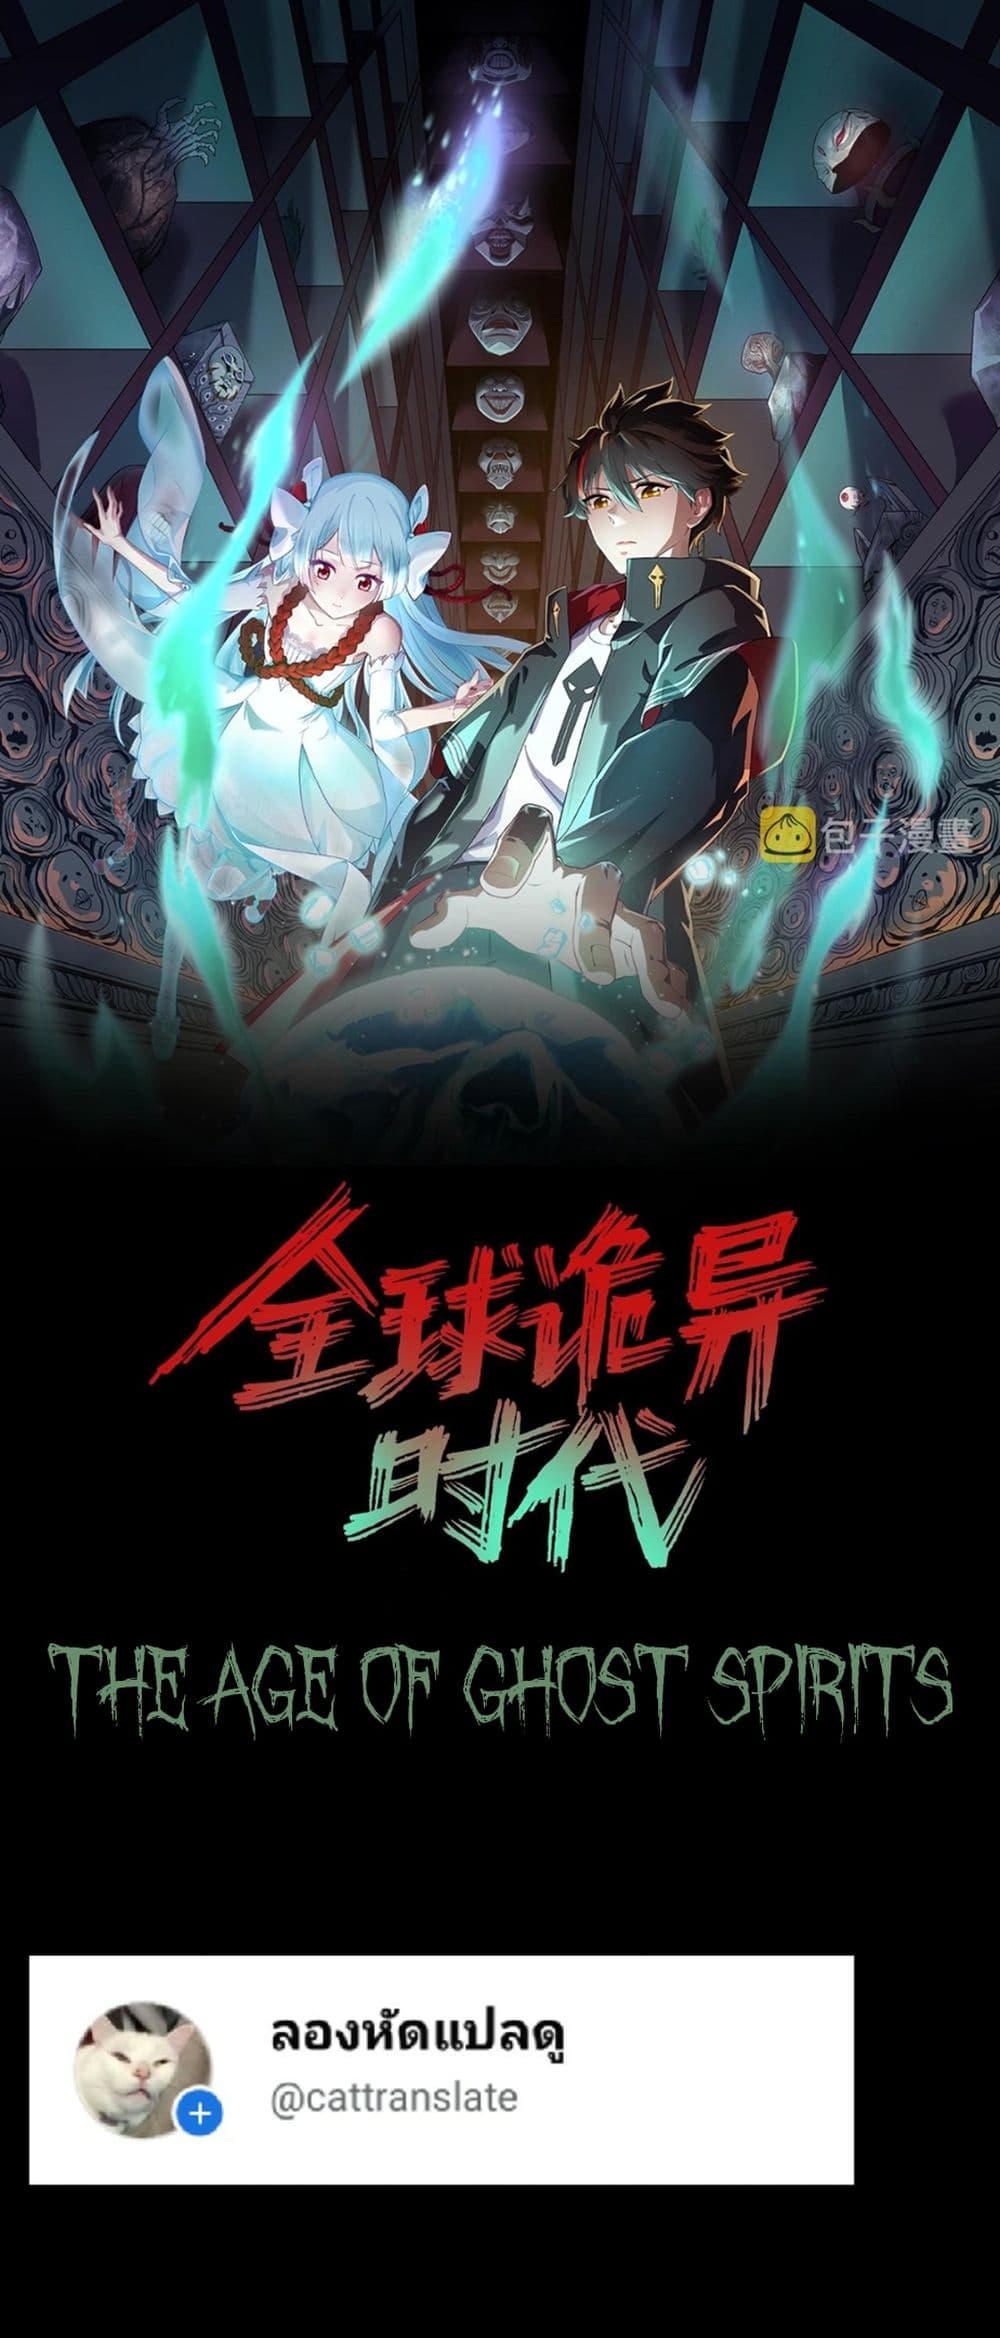 The Age of Ghost Spirits à¸à¸­à¸à¸à¸µà¹ 7 (1)